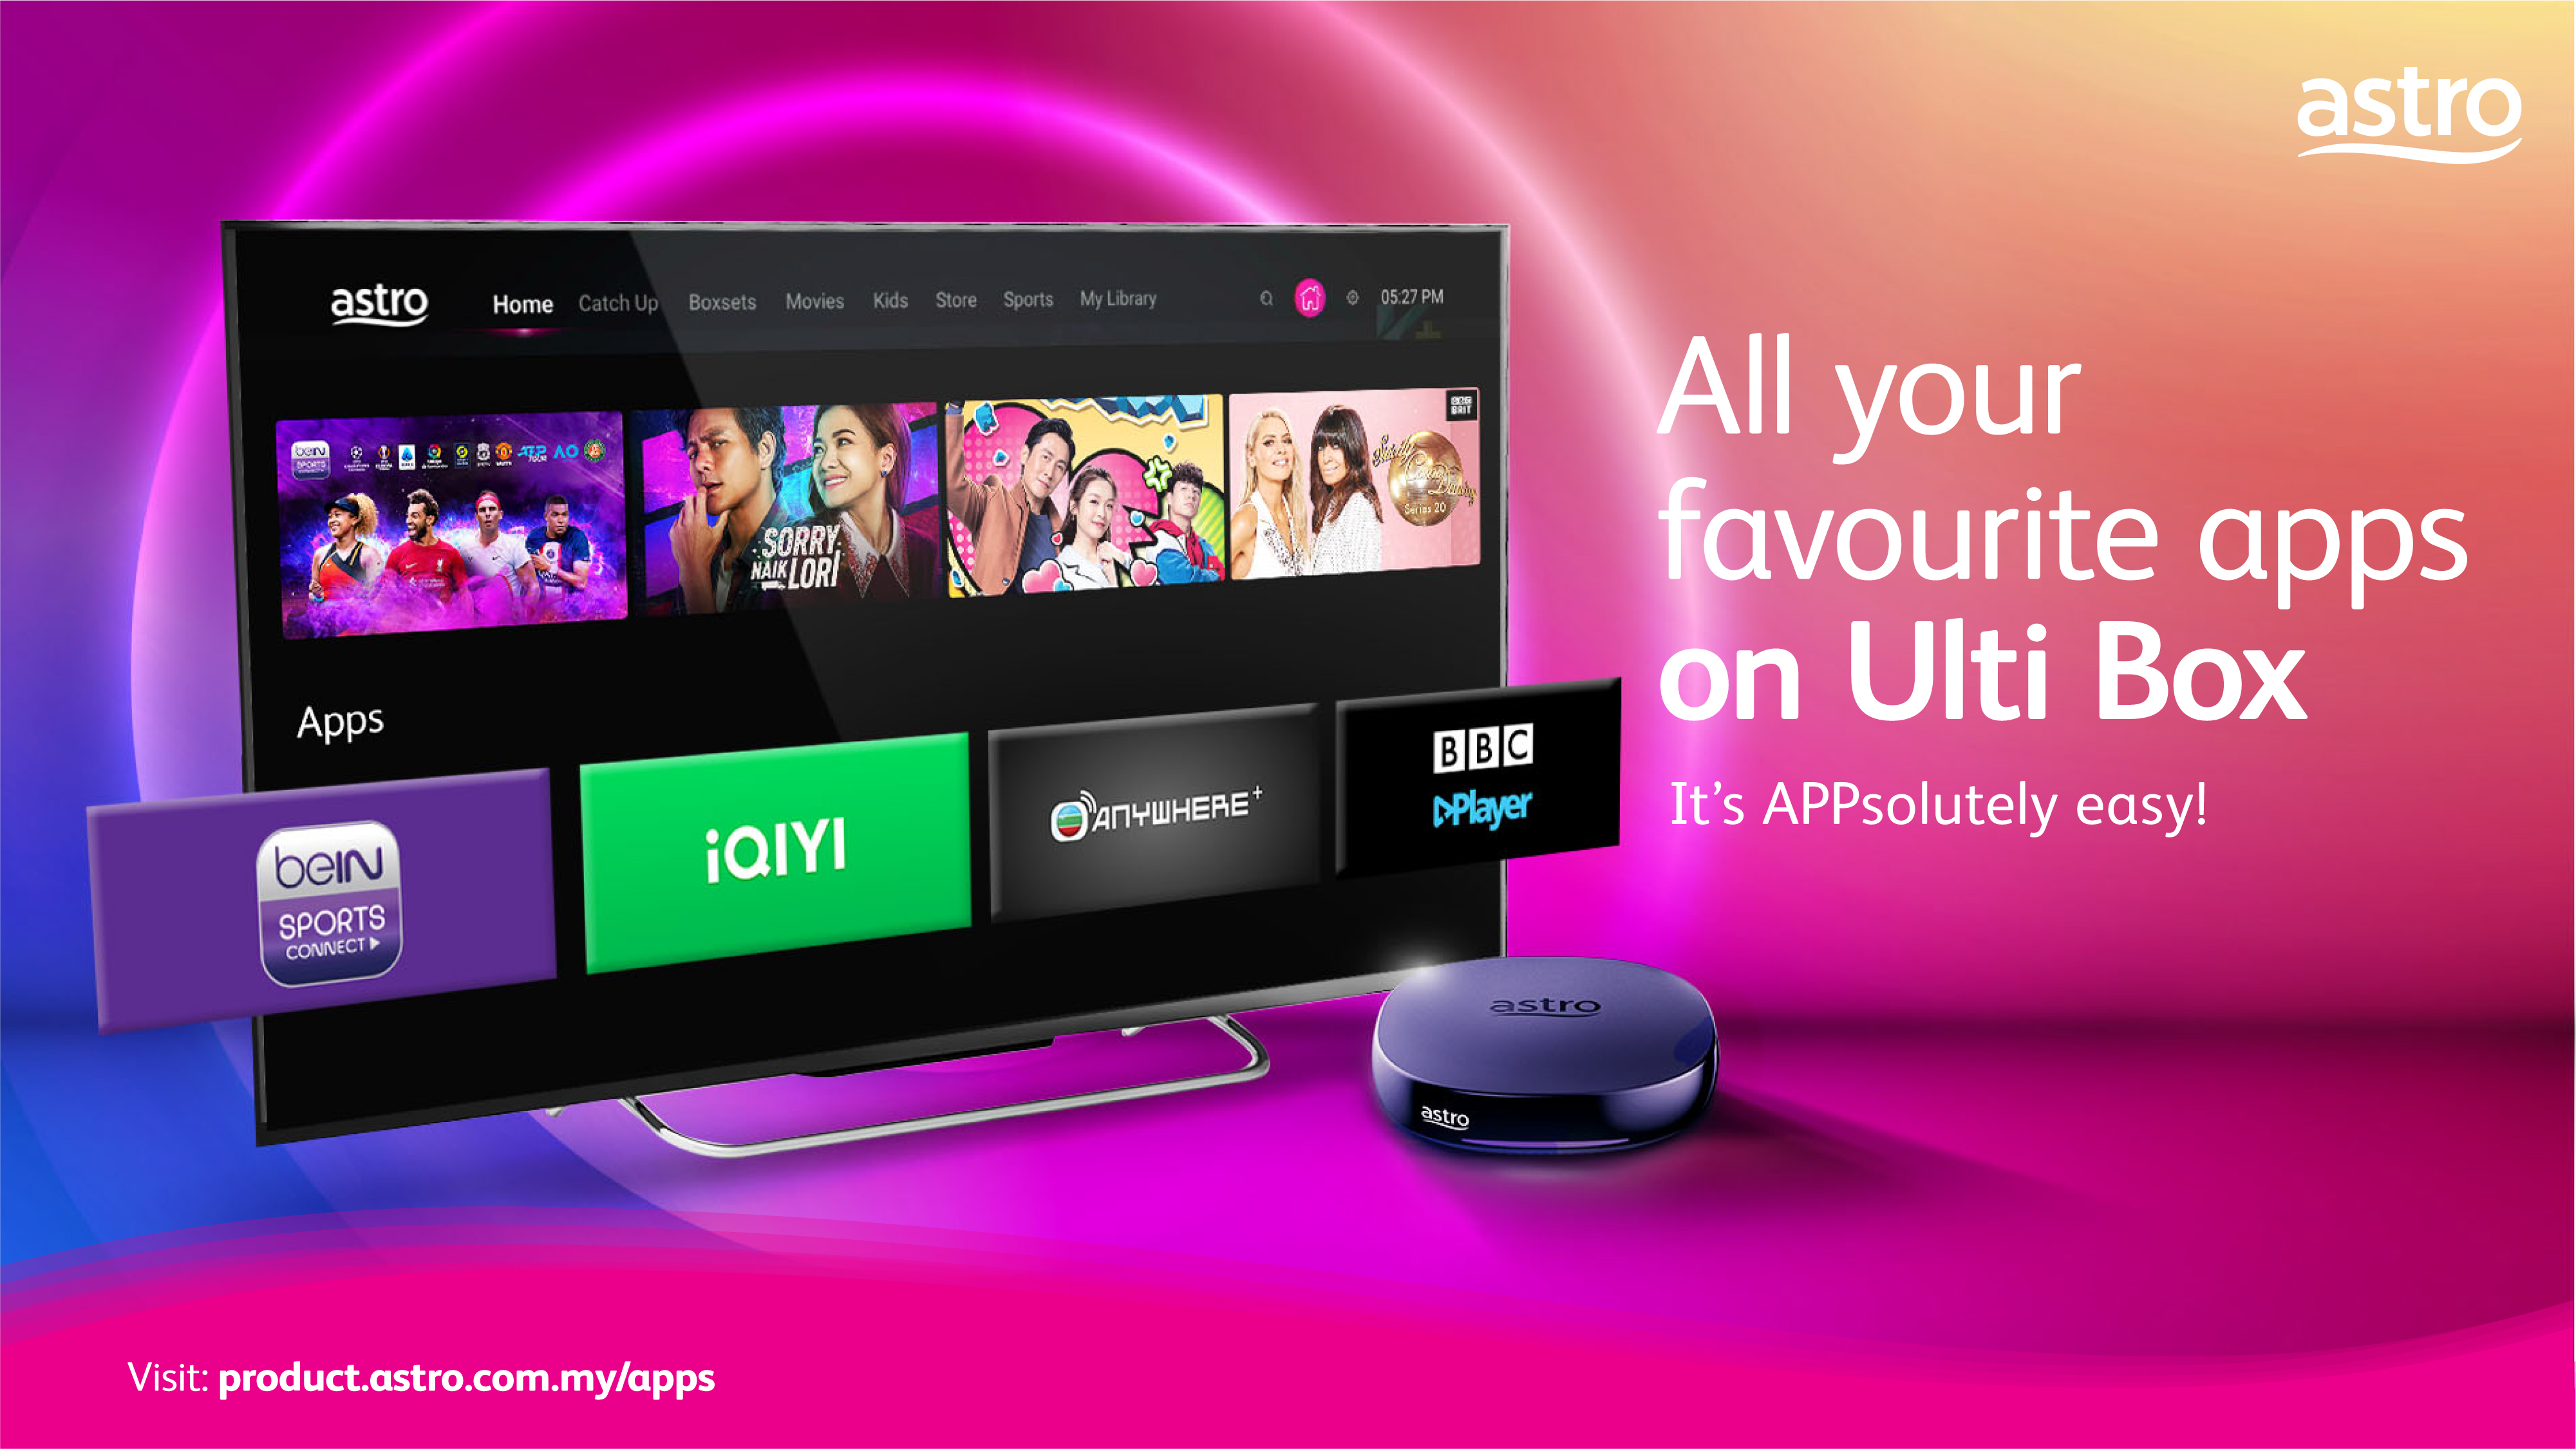 All your favourite apps on Astro Ulti Box - graphic